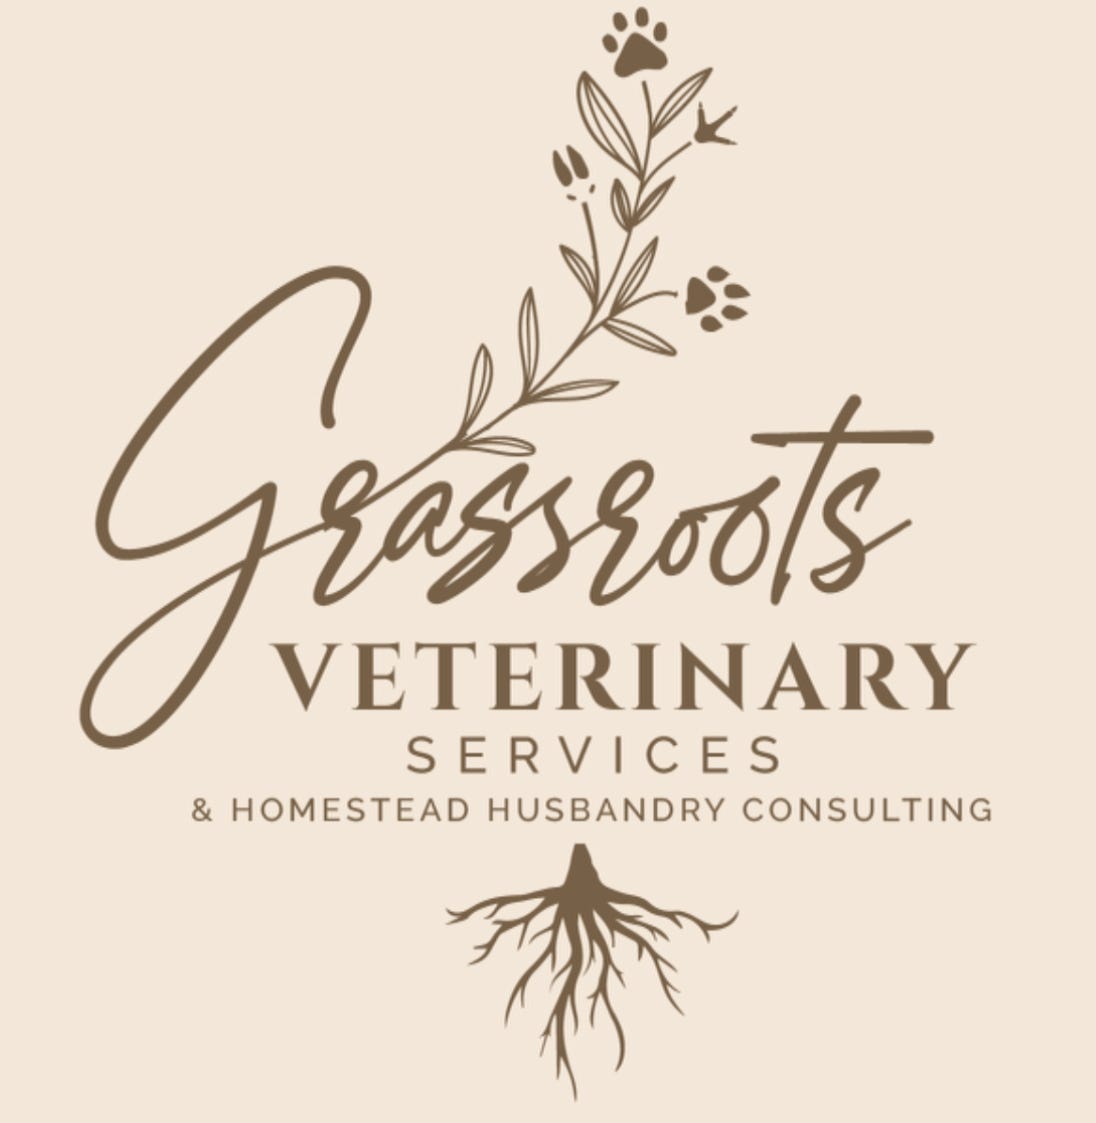 Grassroots Veterinary Services